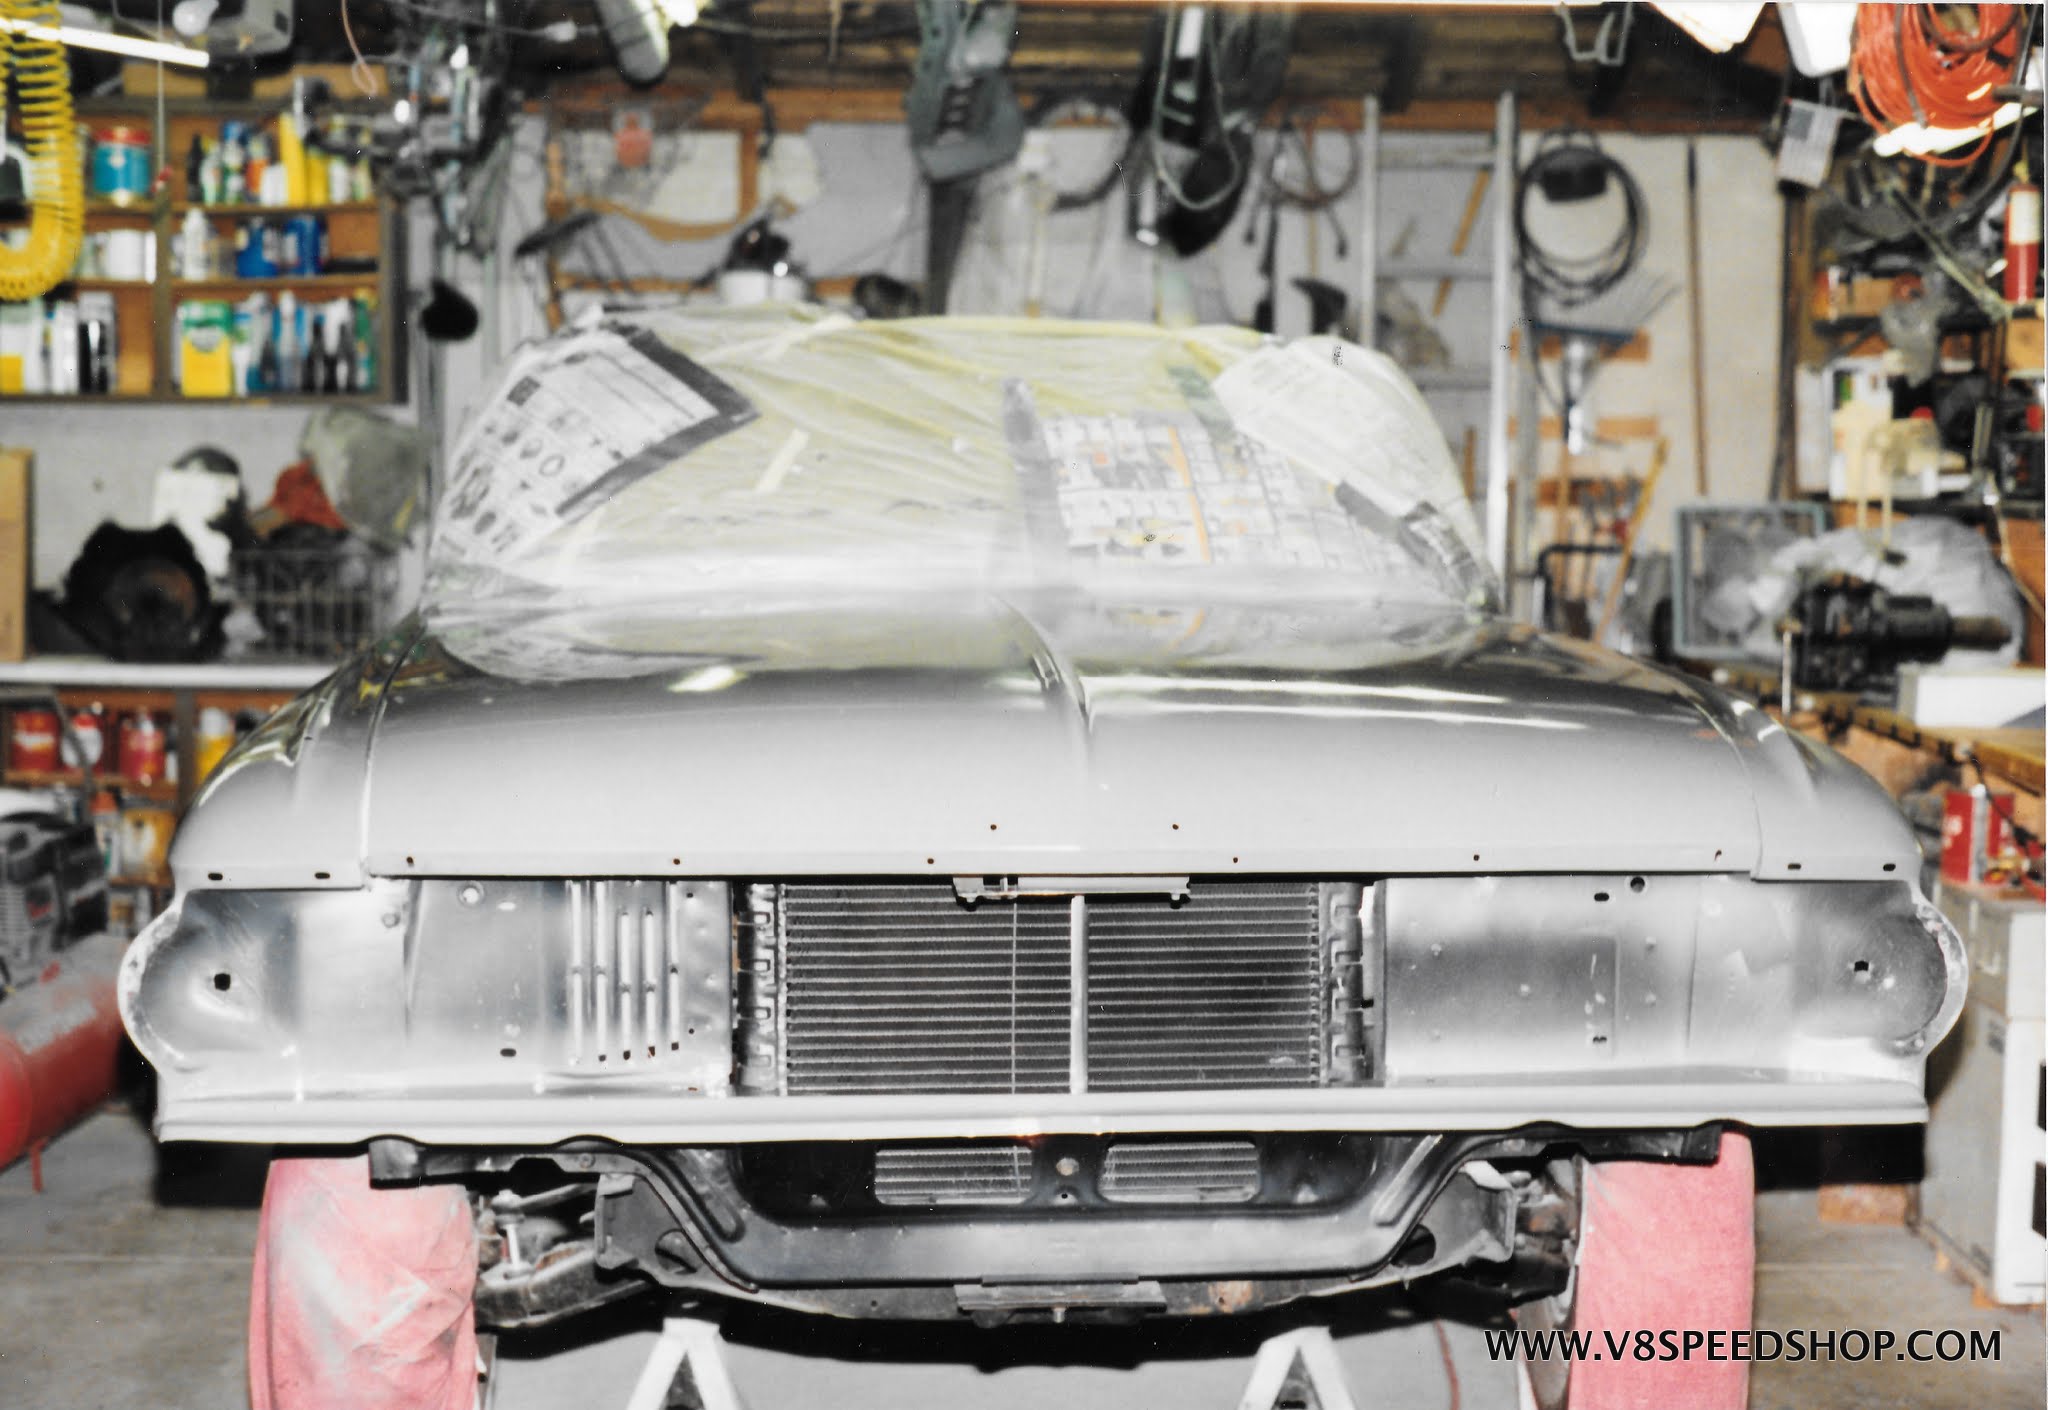 1962 Ford Galaxie 500 XL convertible in epoxy primer